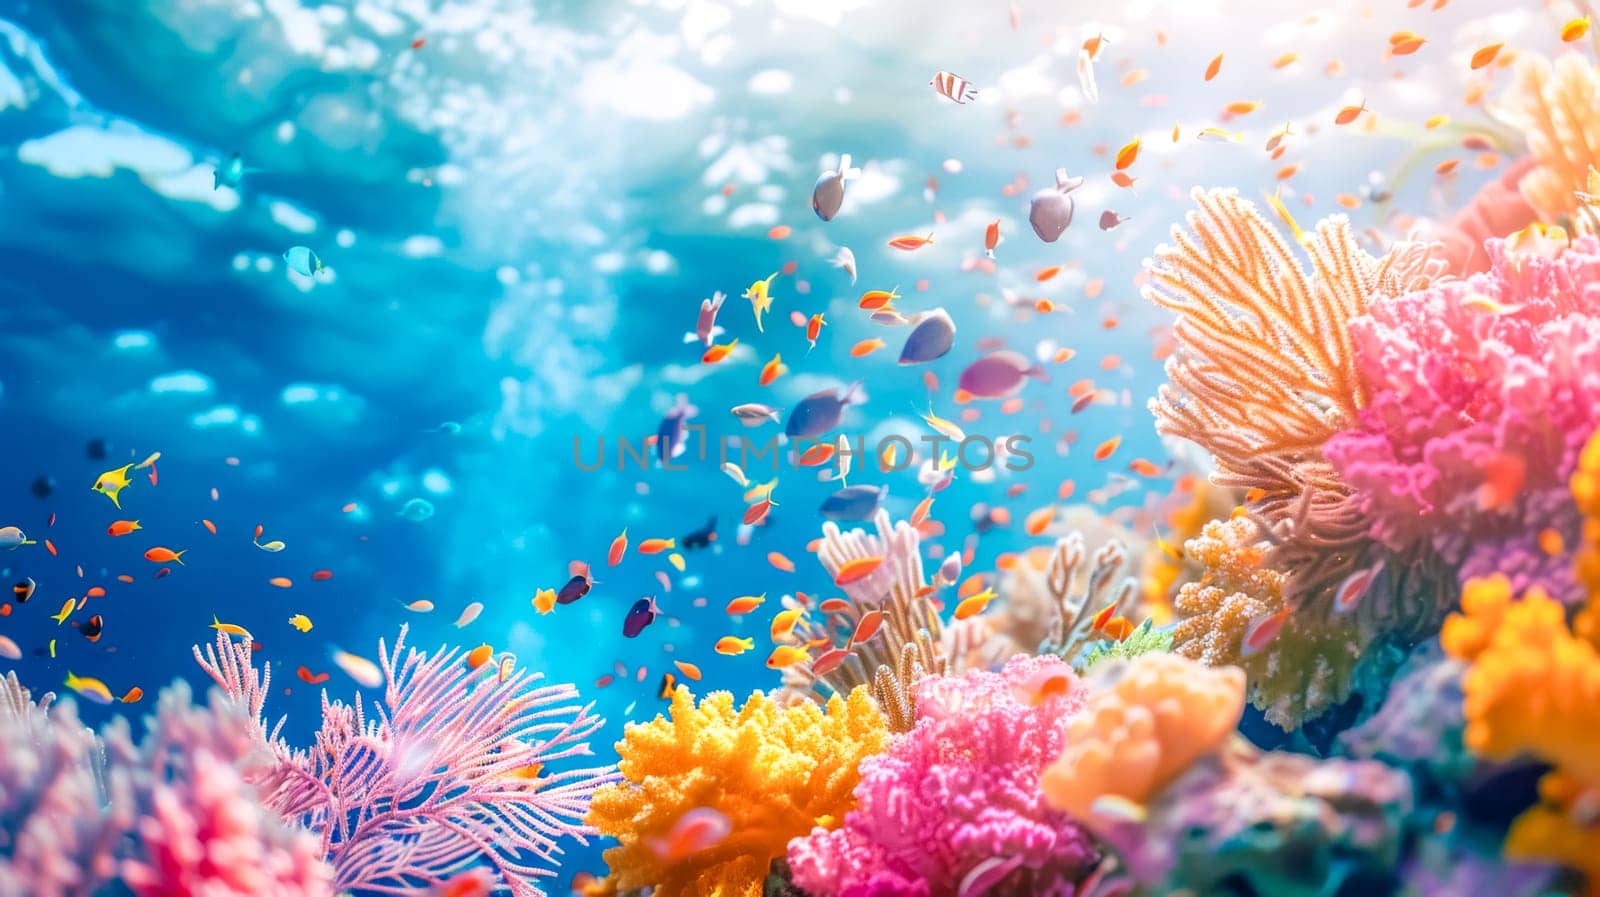 Colorful coral reef bustling with marine life under sunlit water